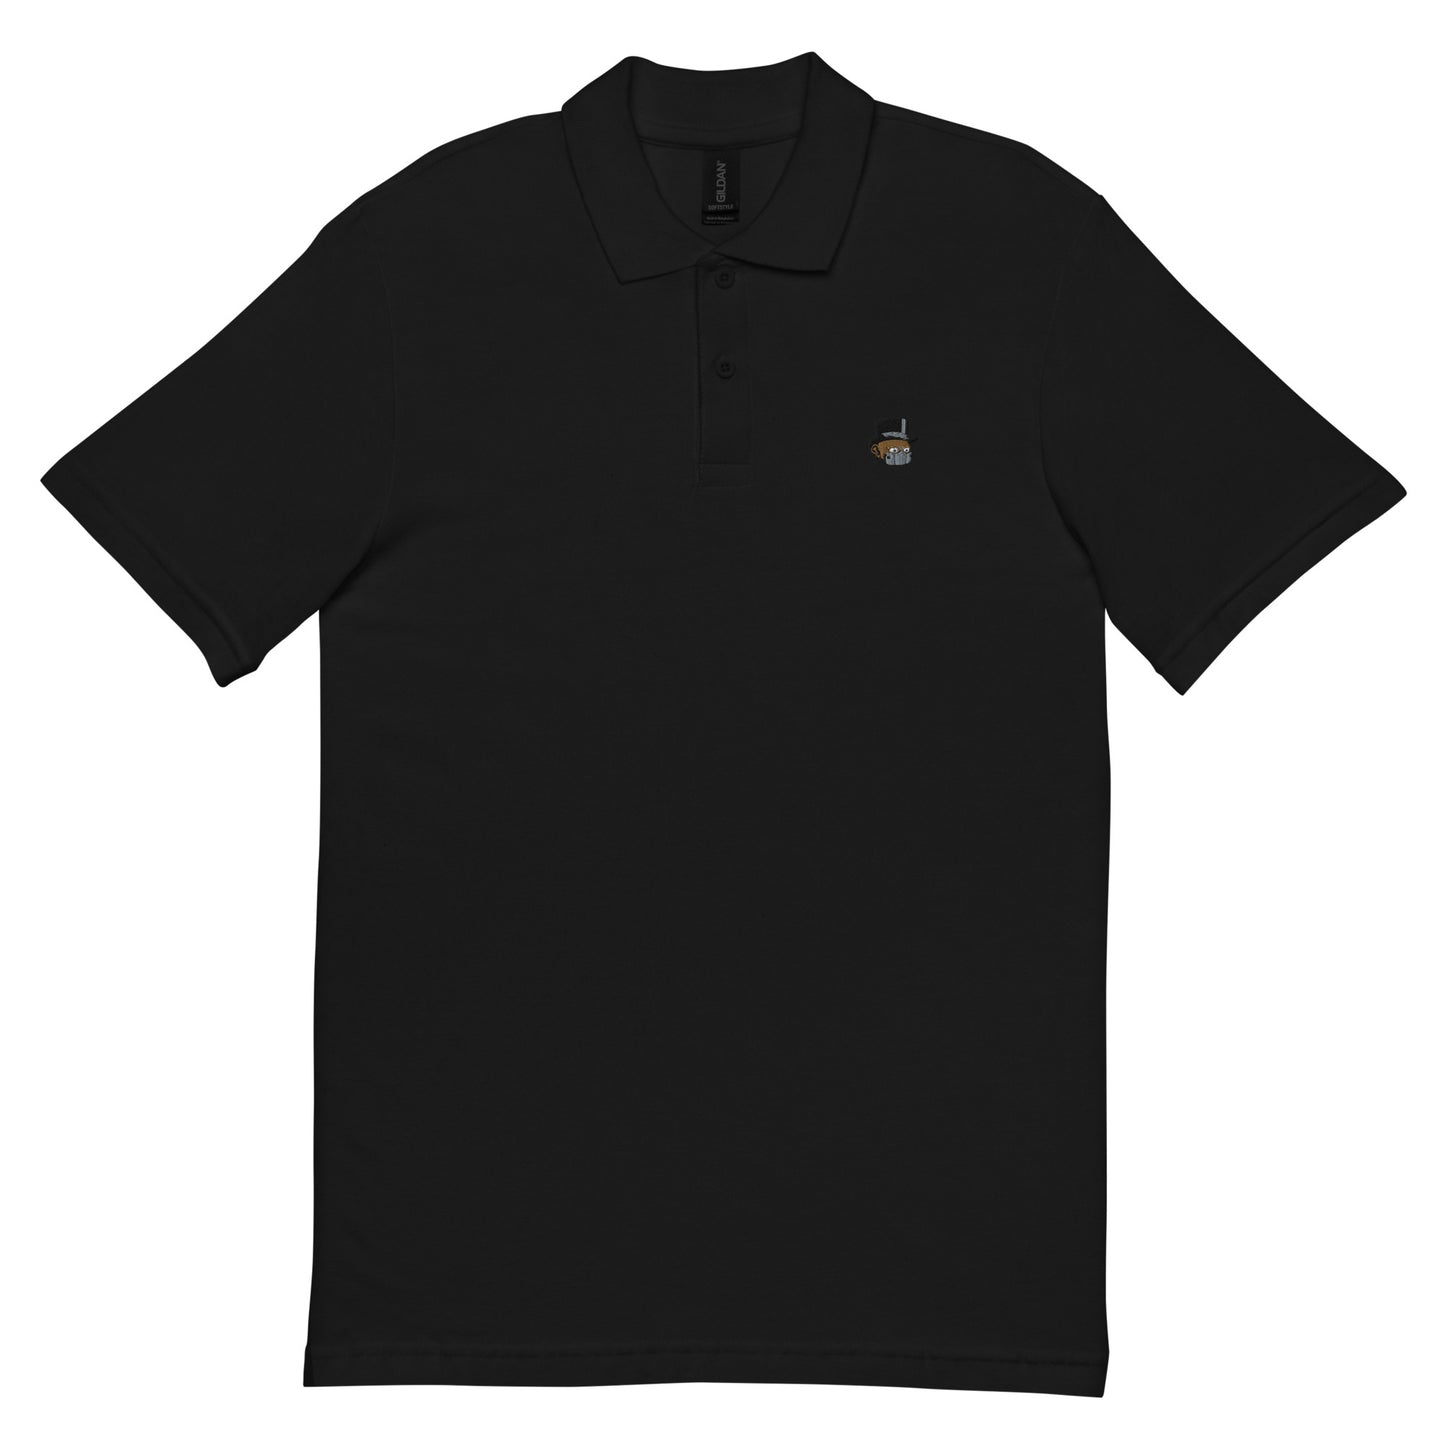 Unisex pique polo shirt feat Donsy #4026